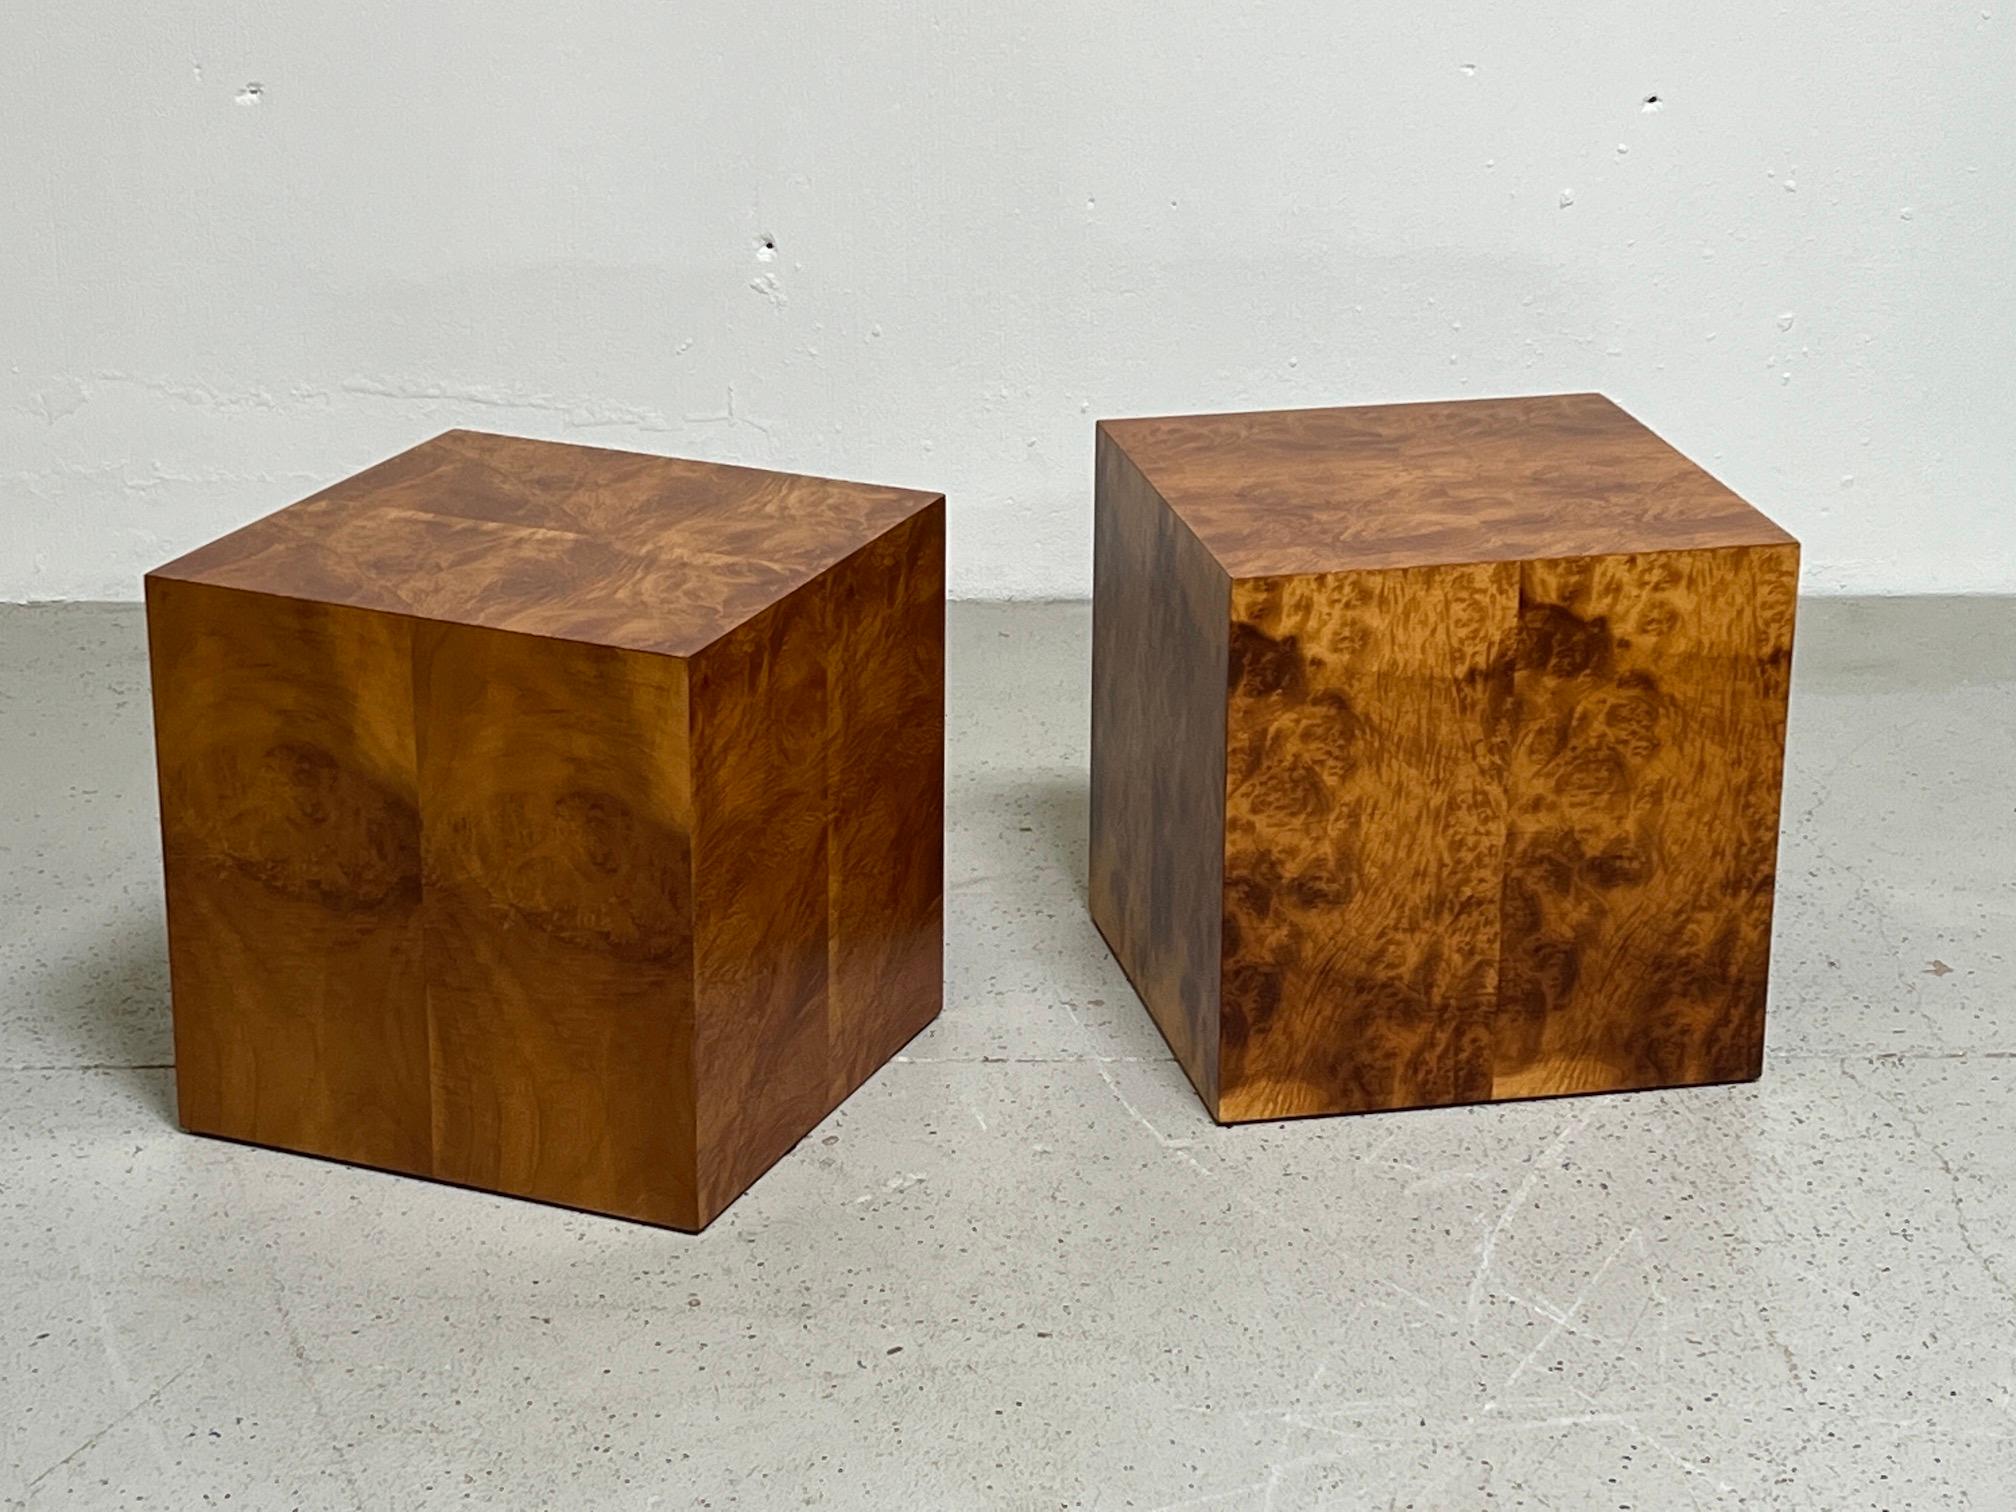 A pair of early cube tables in Myrtle burl designed by Edward Wormley for Dunbar.